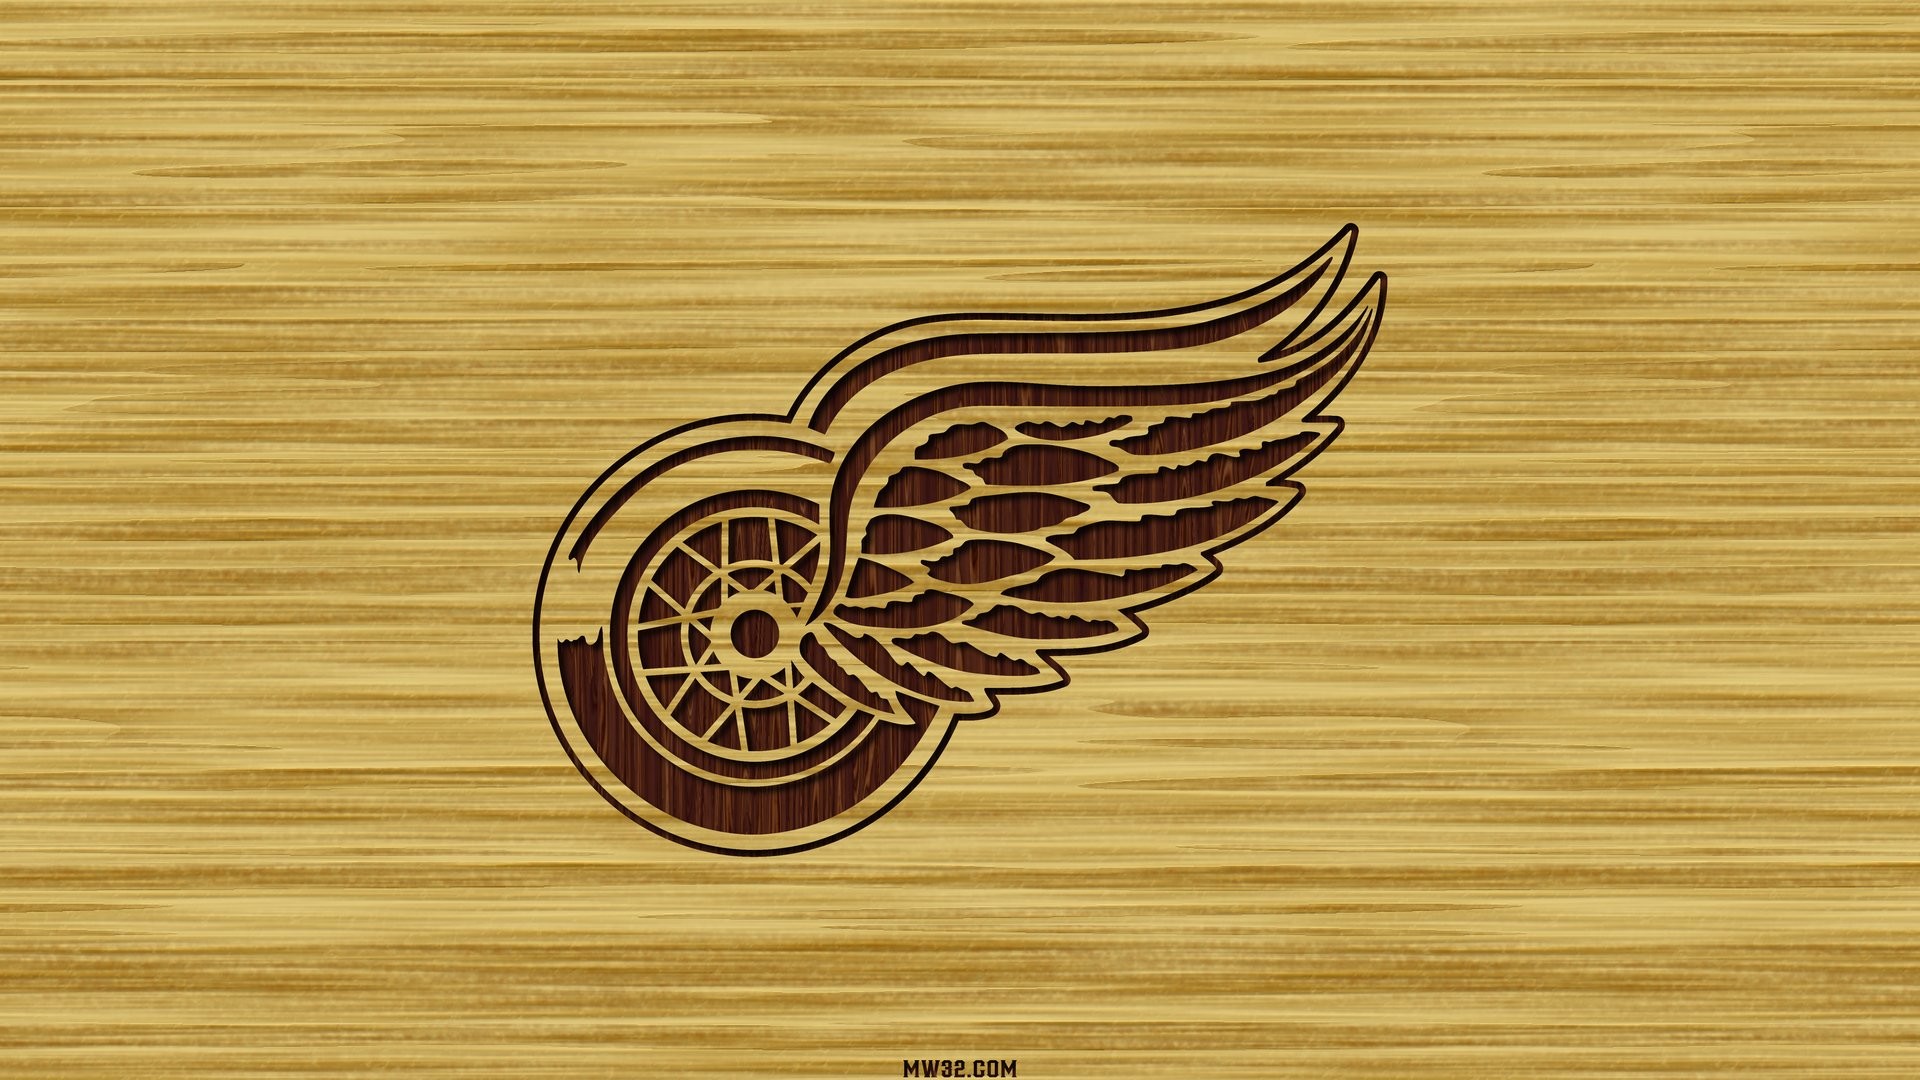 Nice iPhone (4/4s size) Detroit Red Wings wallpaper (Winter